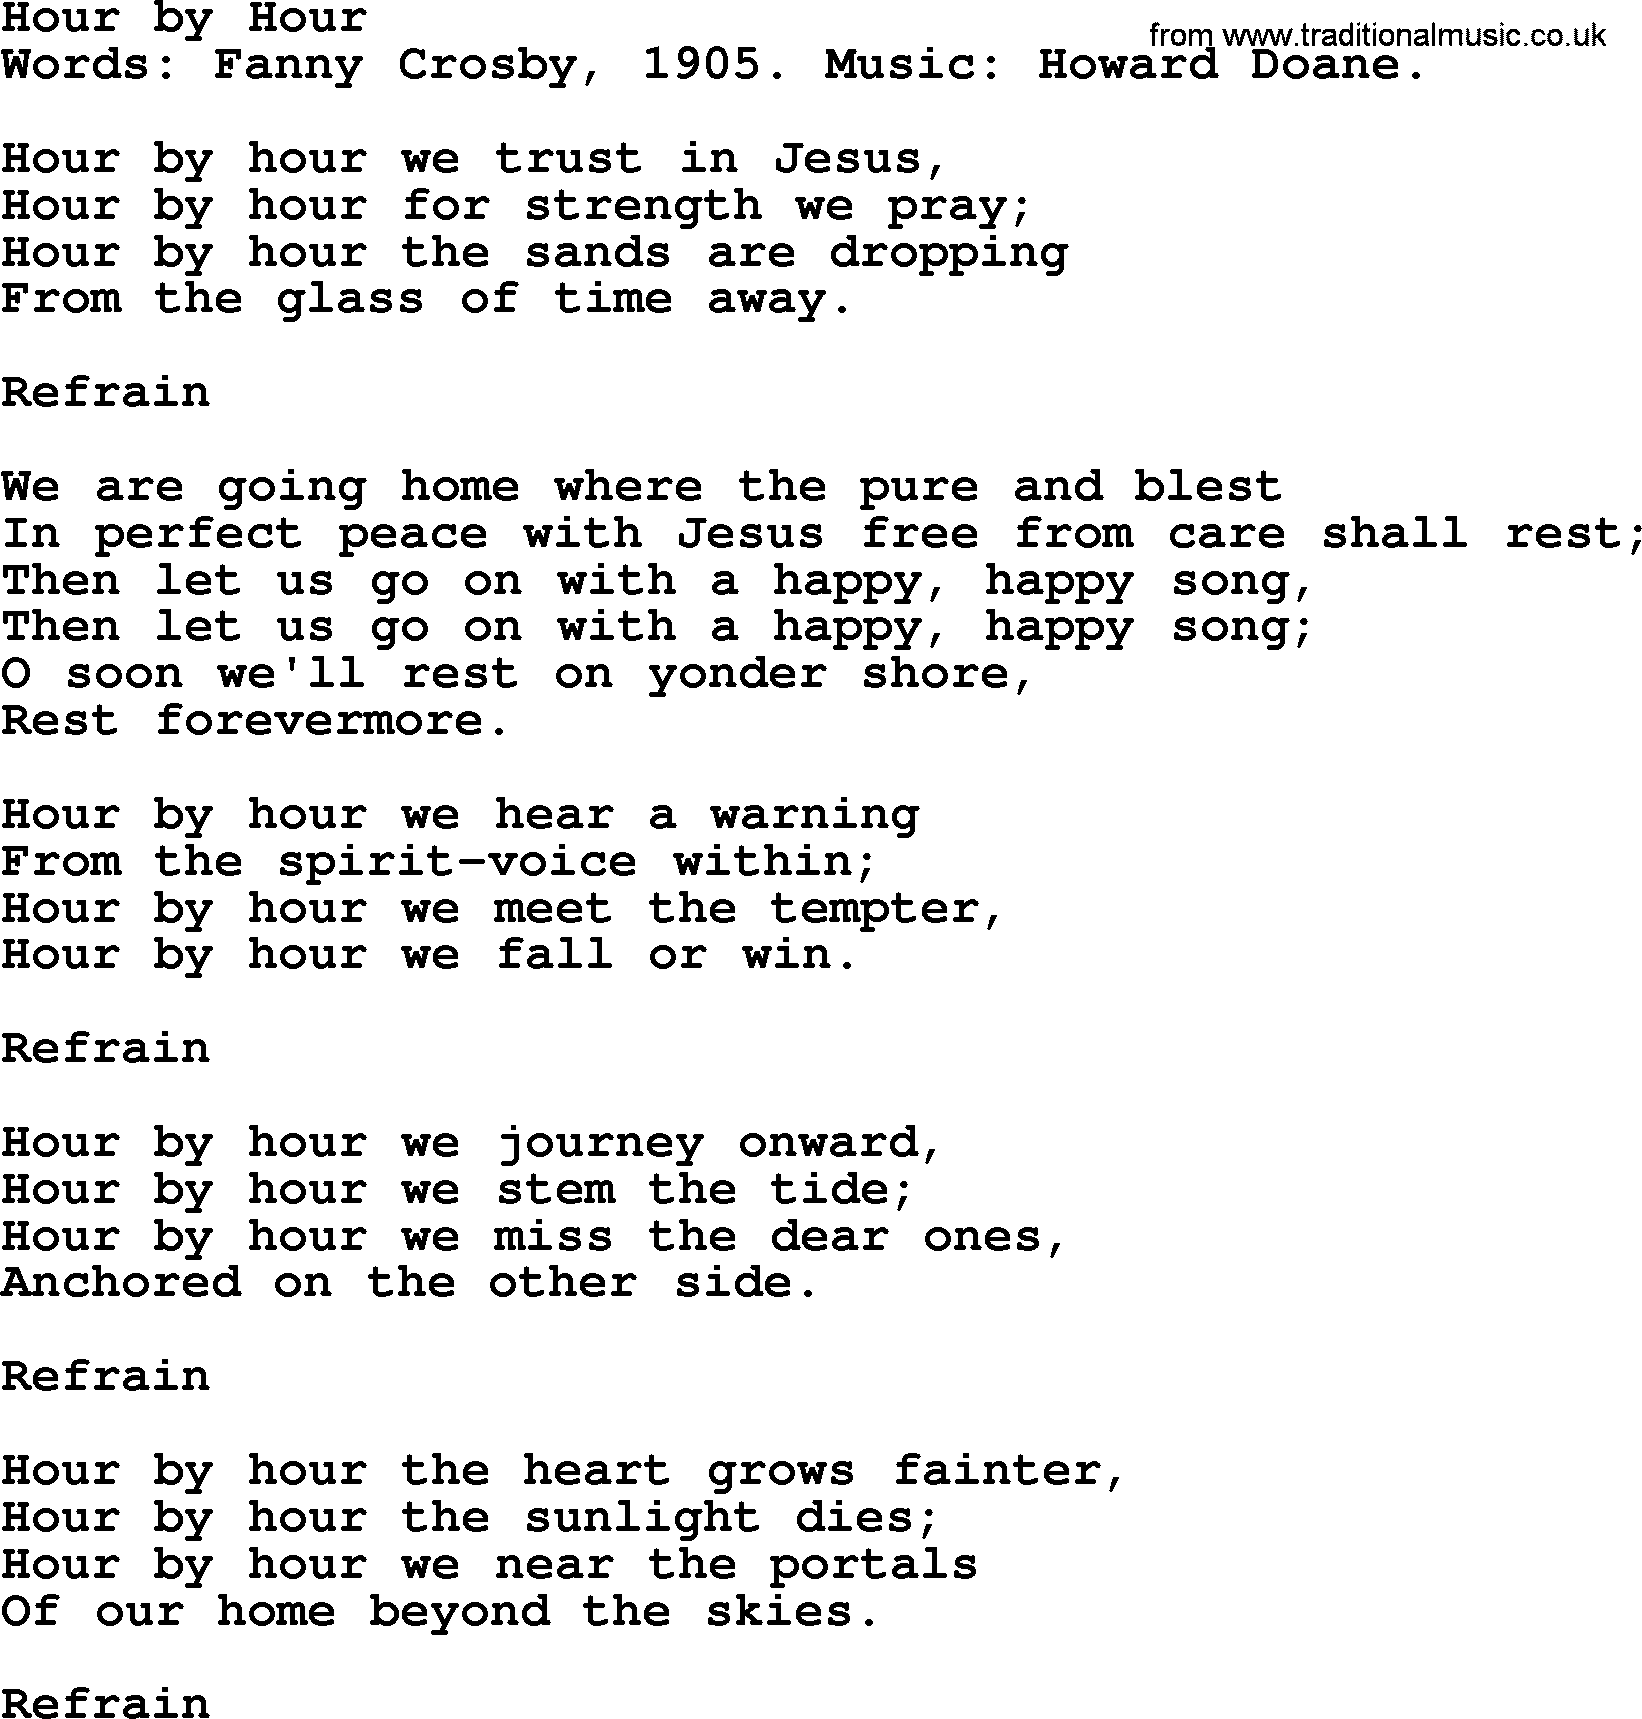 Fanny Crosby song: Hour By Hour, lyrics